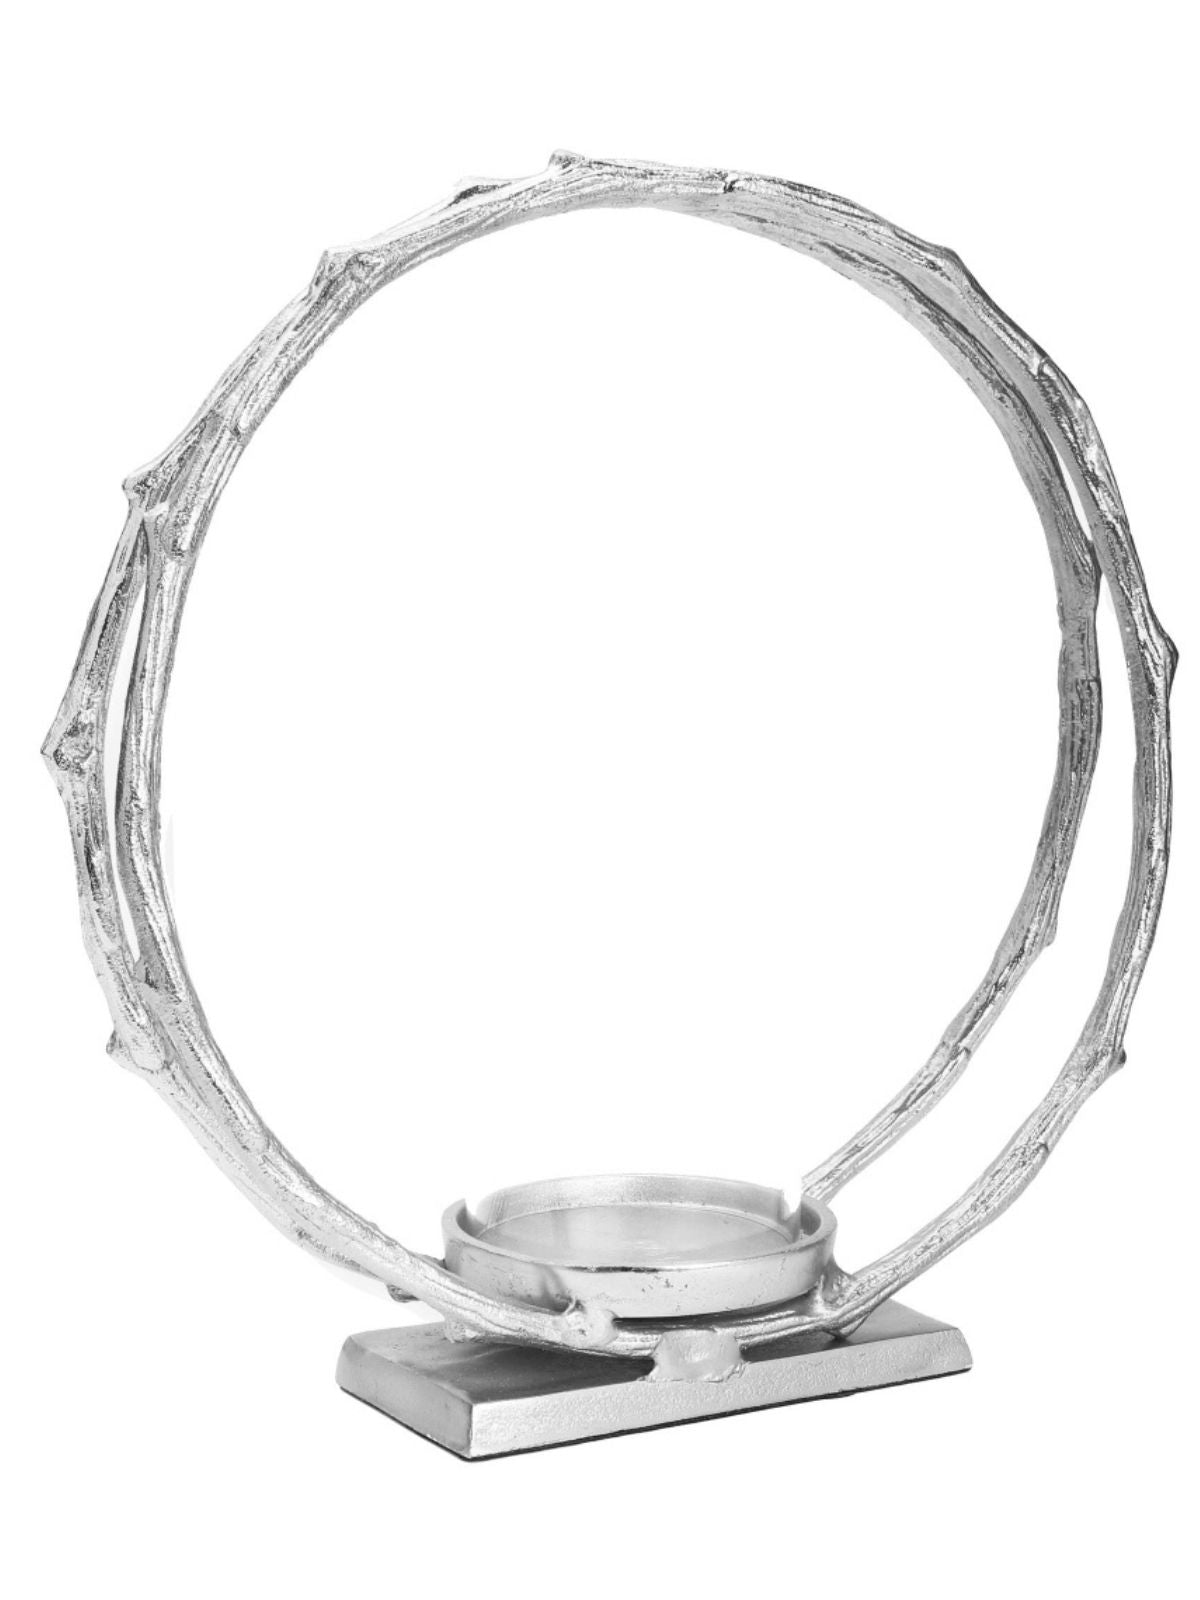 7.5 inch Round Circle Stainless Steel Hurricane Candle Holder with Double Hoop Design in Silver Color.